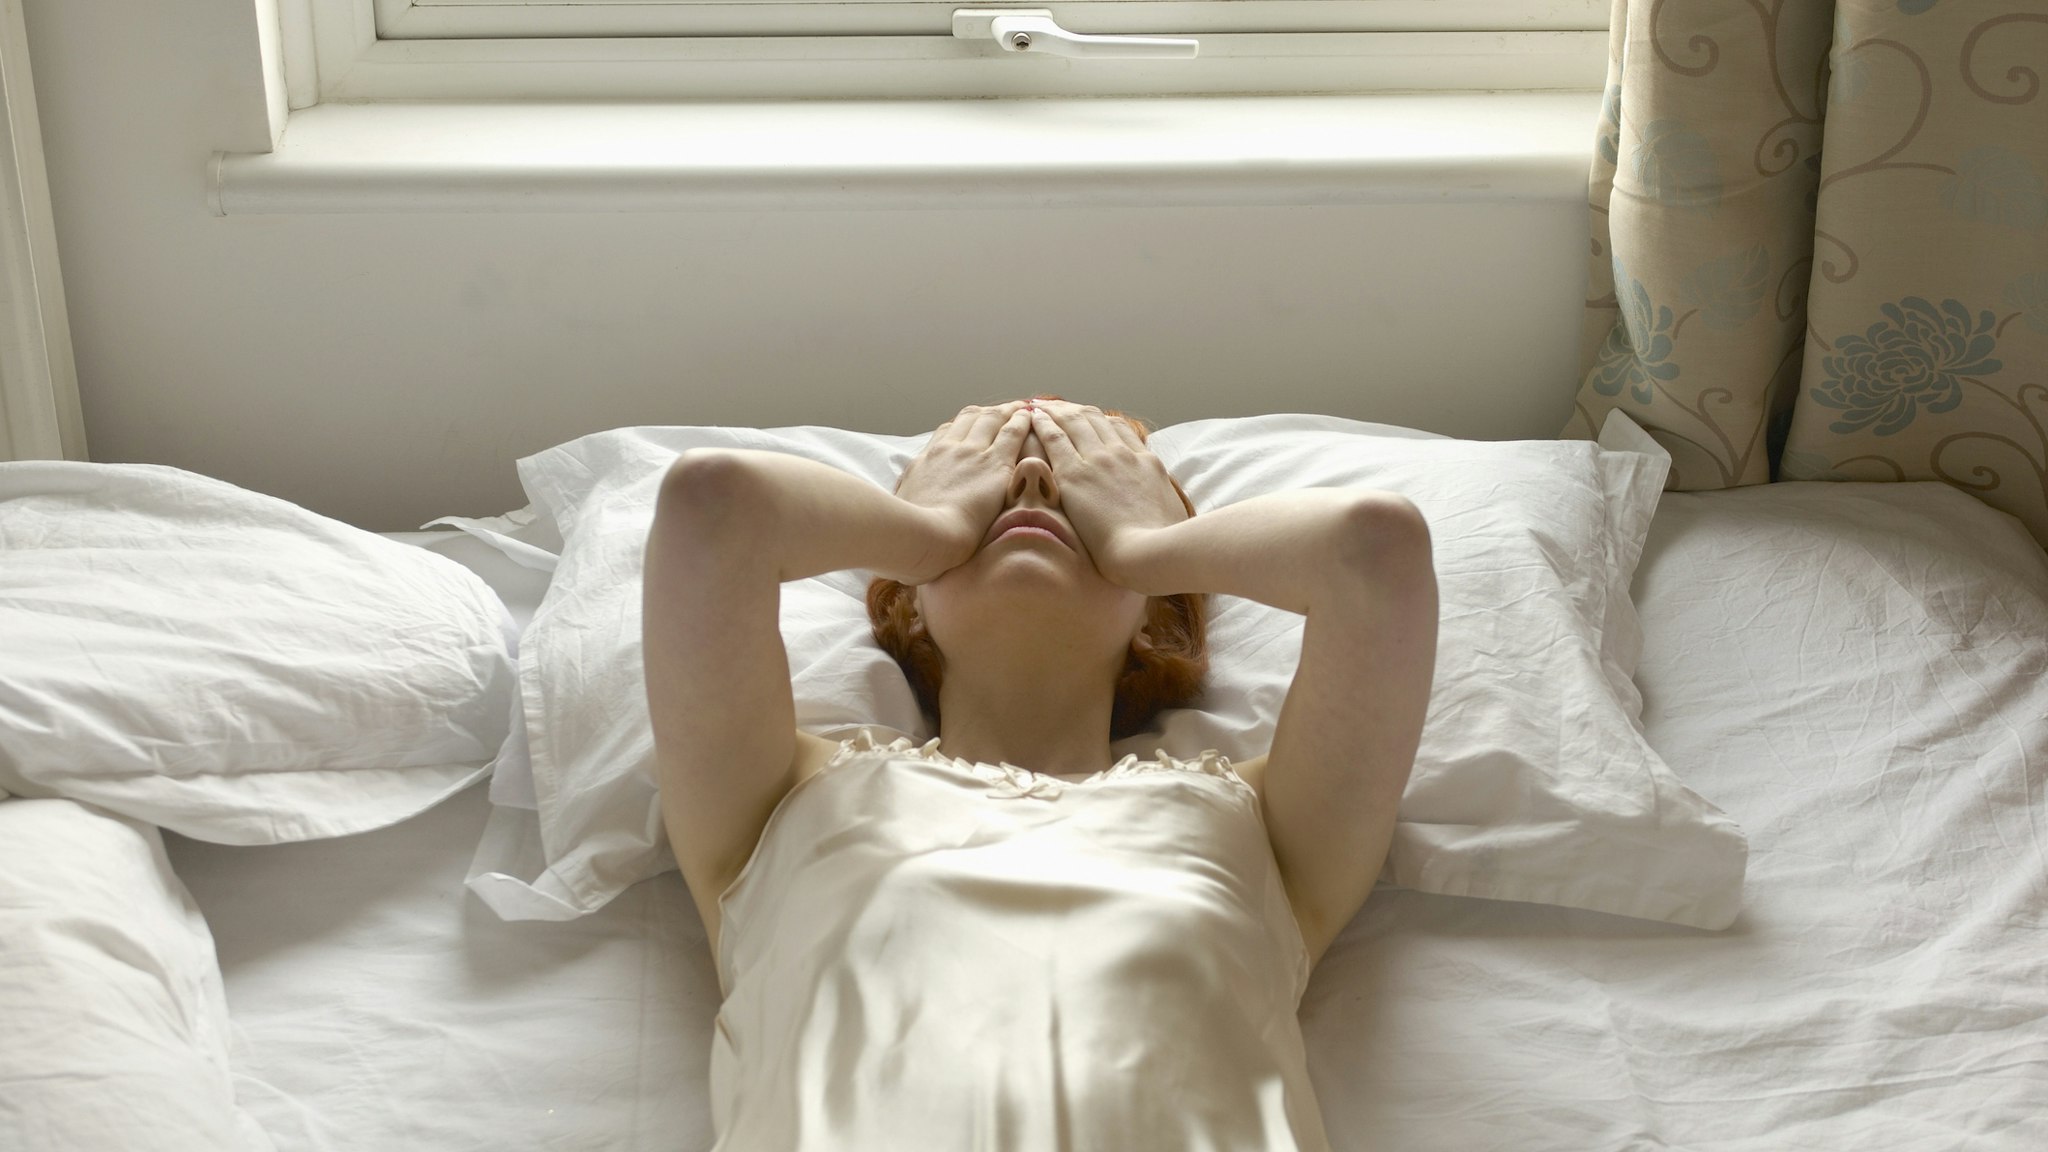 woman on bed with hands over eyes - stock photo